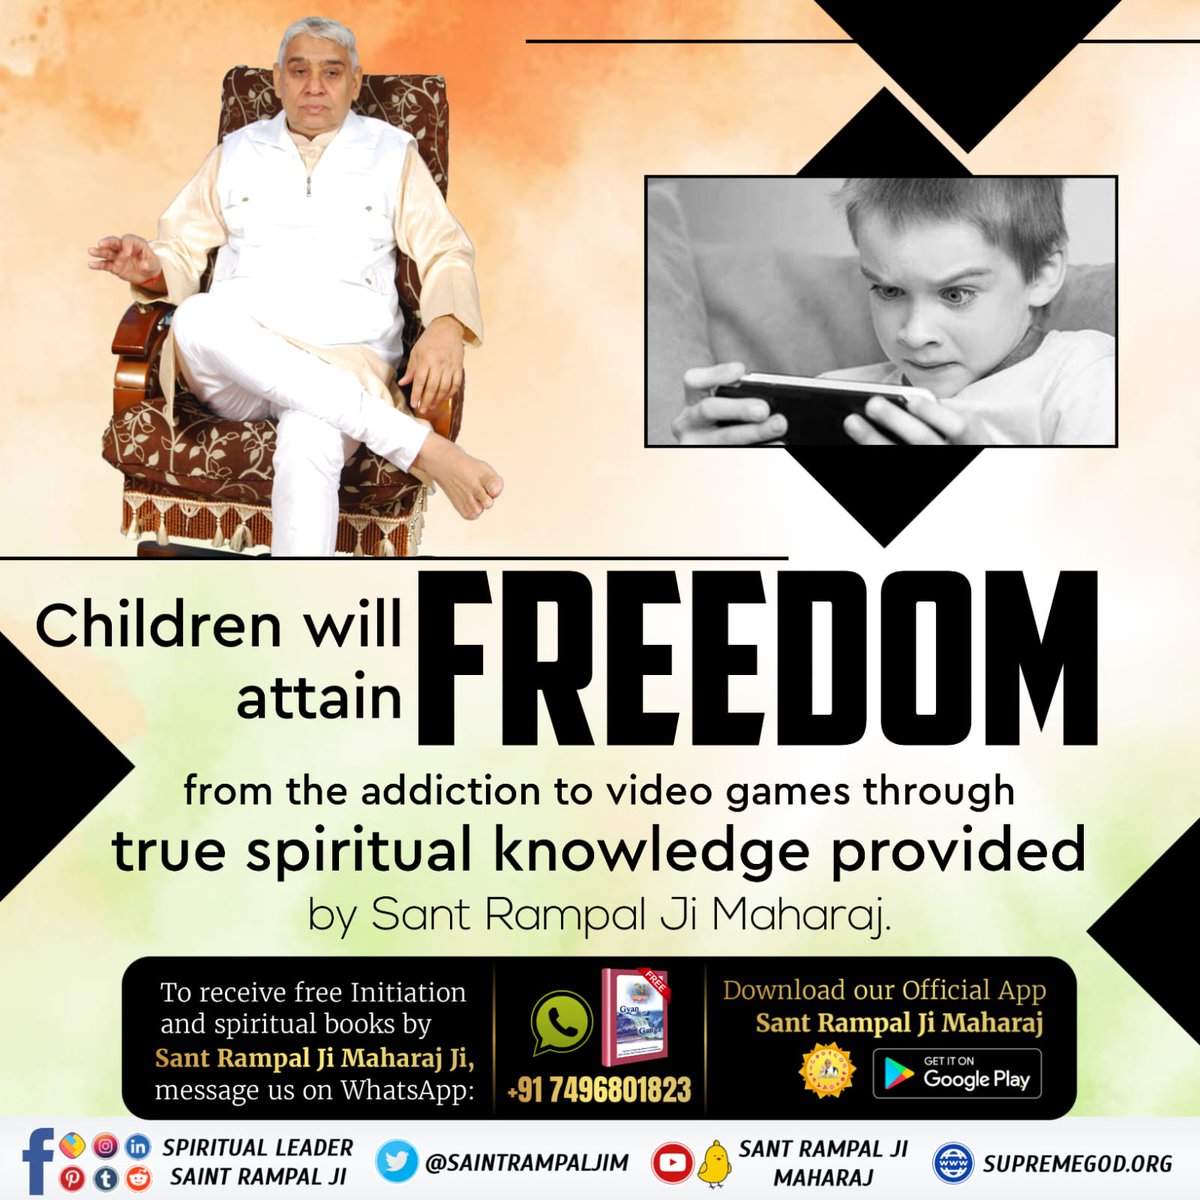 #FreedomFromEvils Children will attain freedom from the addiction to video games through true spiritual knowledge provided by @SaintRampalJiM Maharaj.